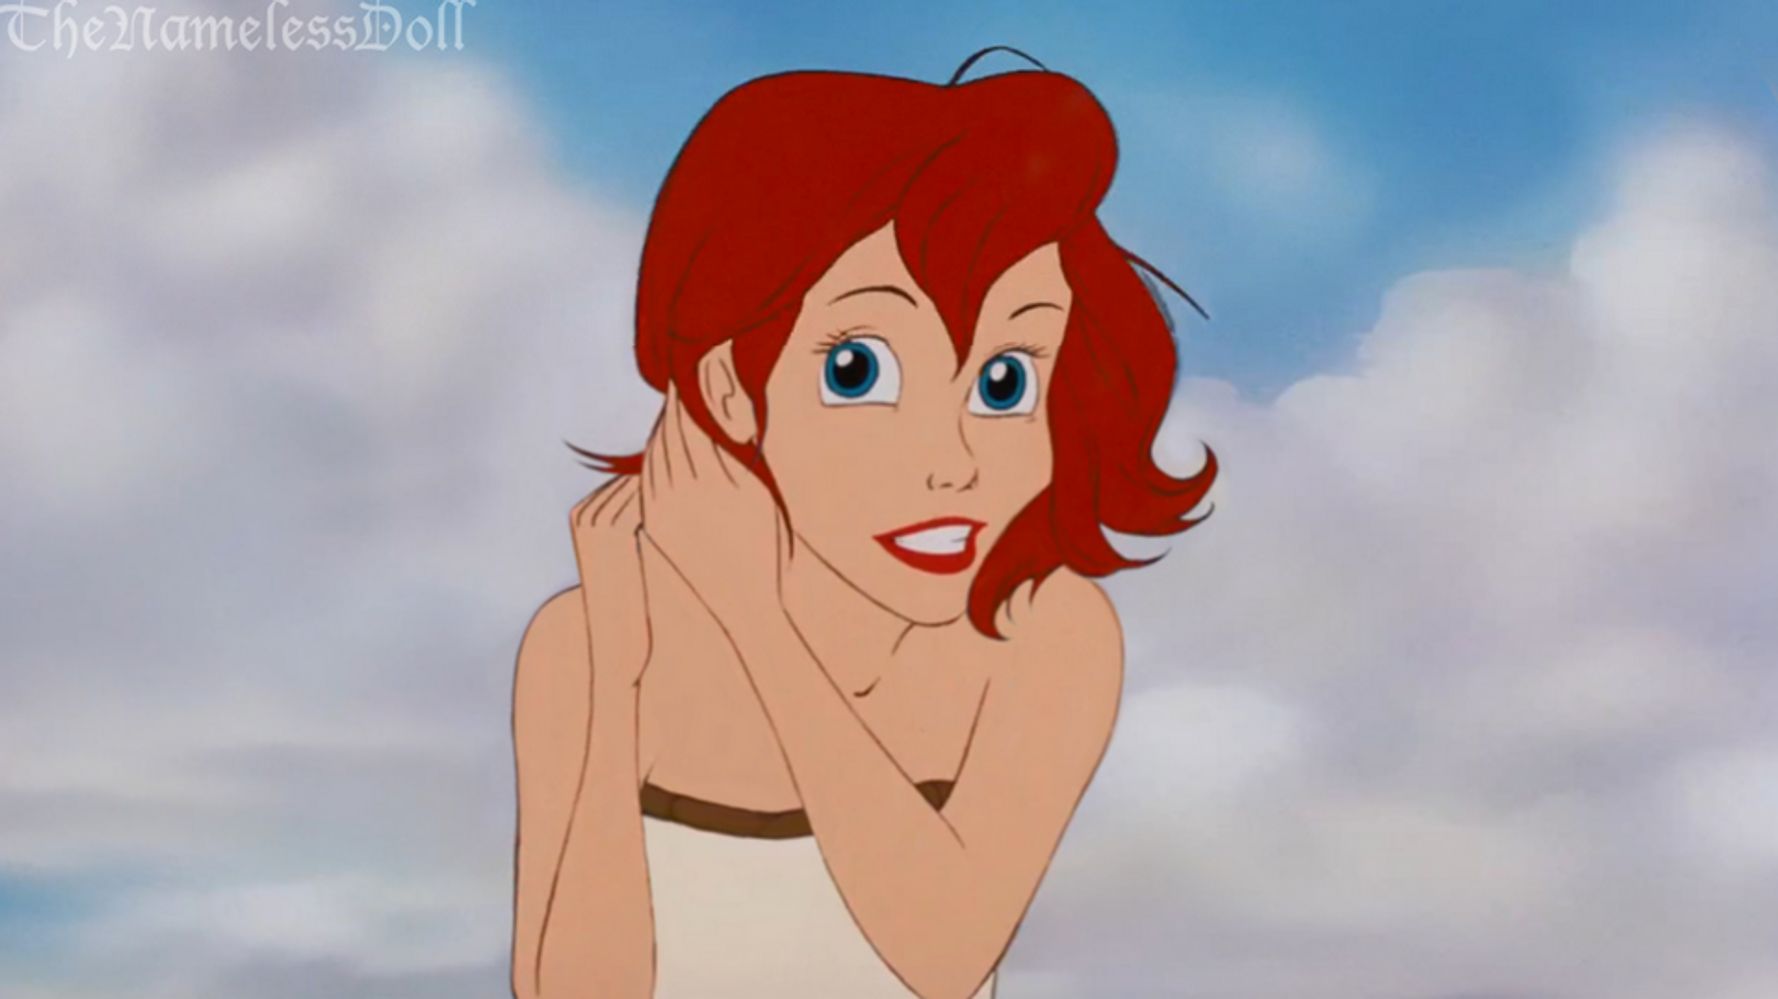 Your Favorite Disney Princesses Reimagined With Short Hair